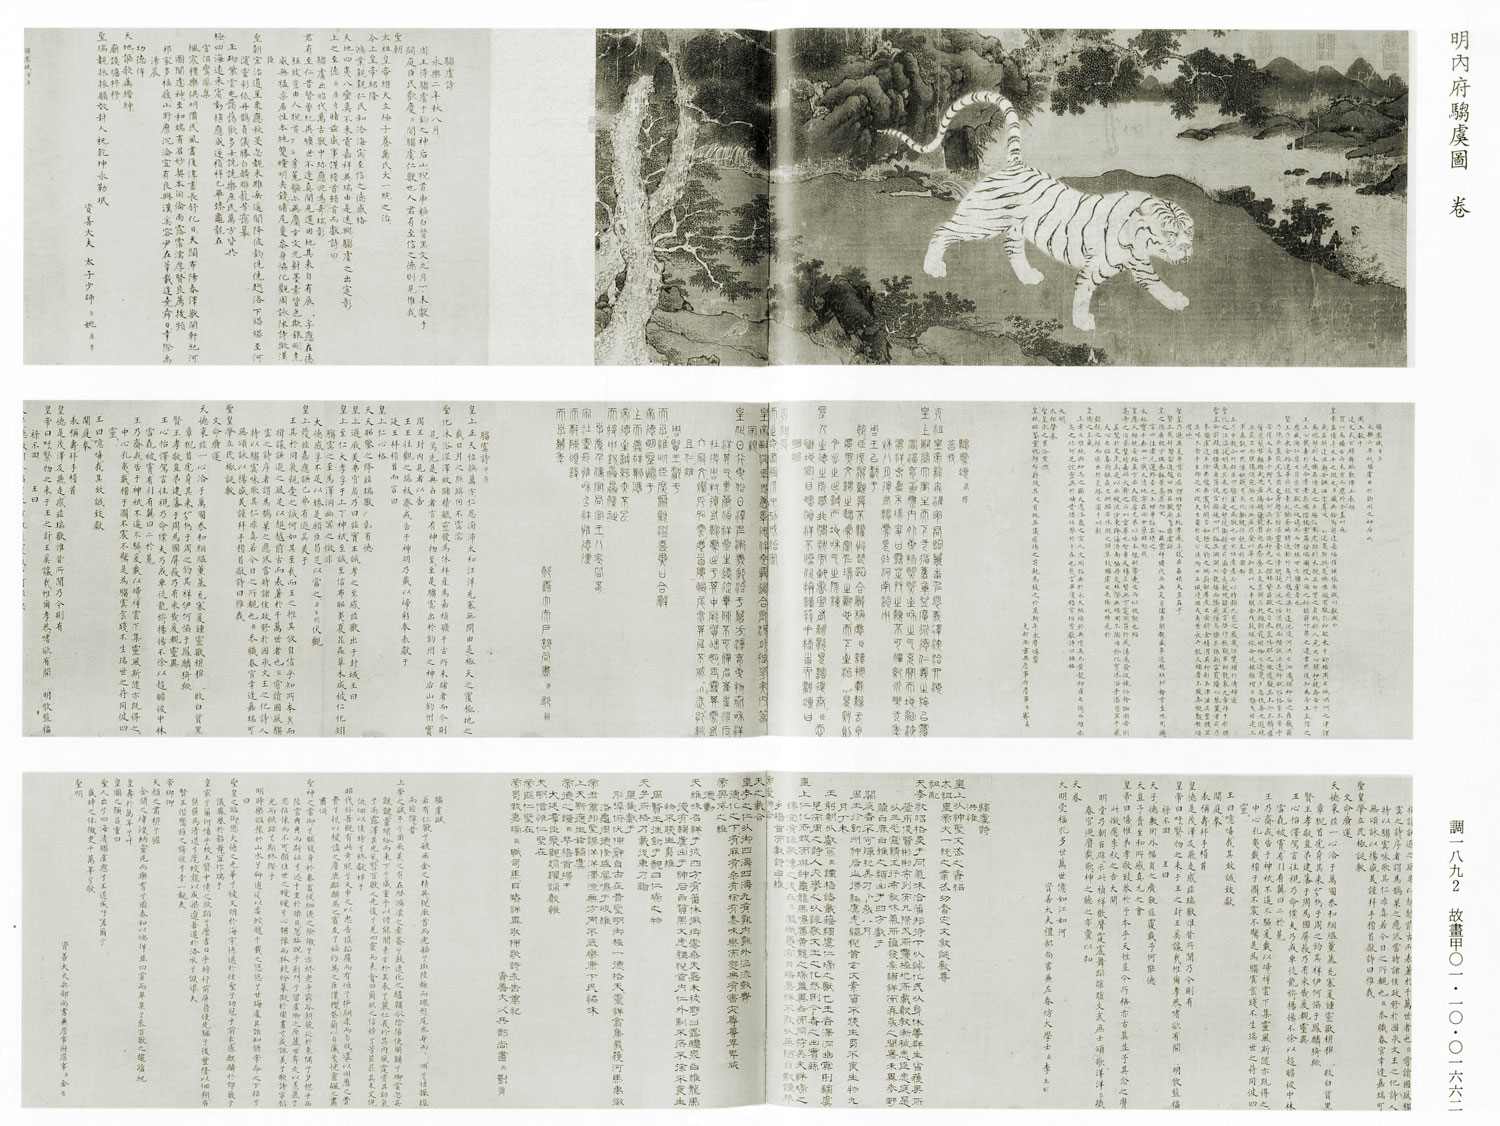 Three two-page spreads from a book: in the top spread, Chinese text on the left and a drawing of a tiger on a riverbank on the right; center and bottom spreads, more Chinese text